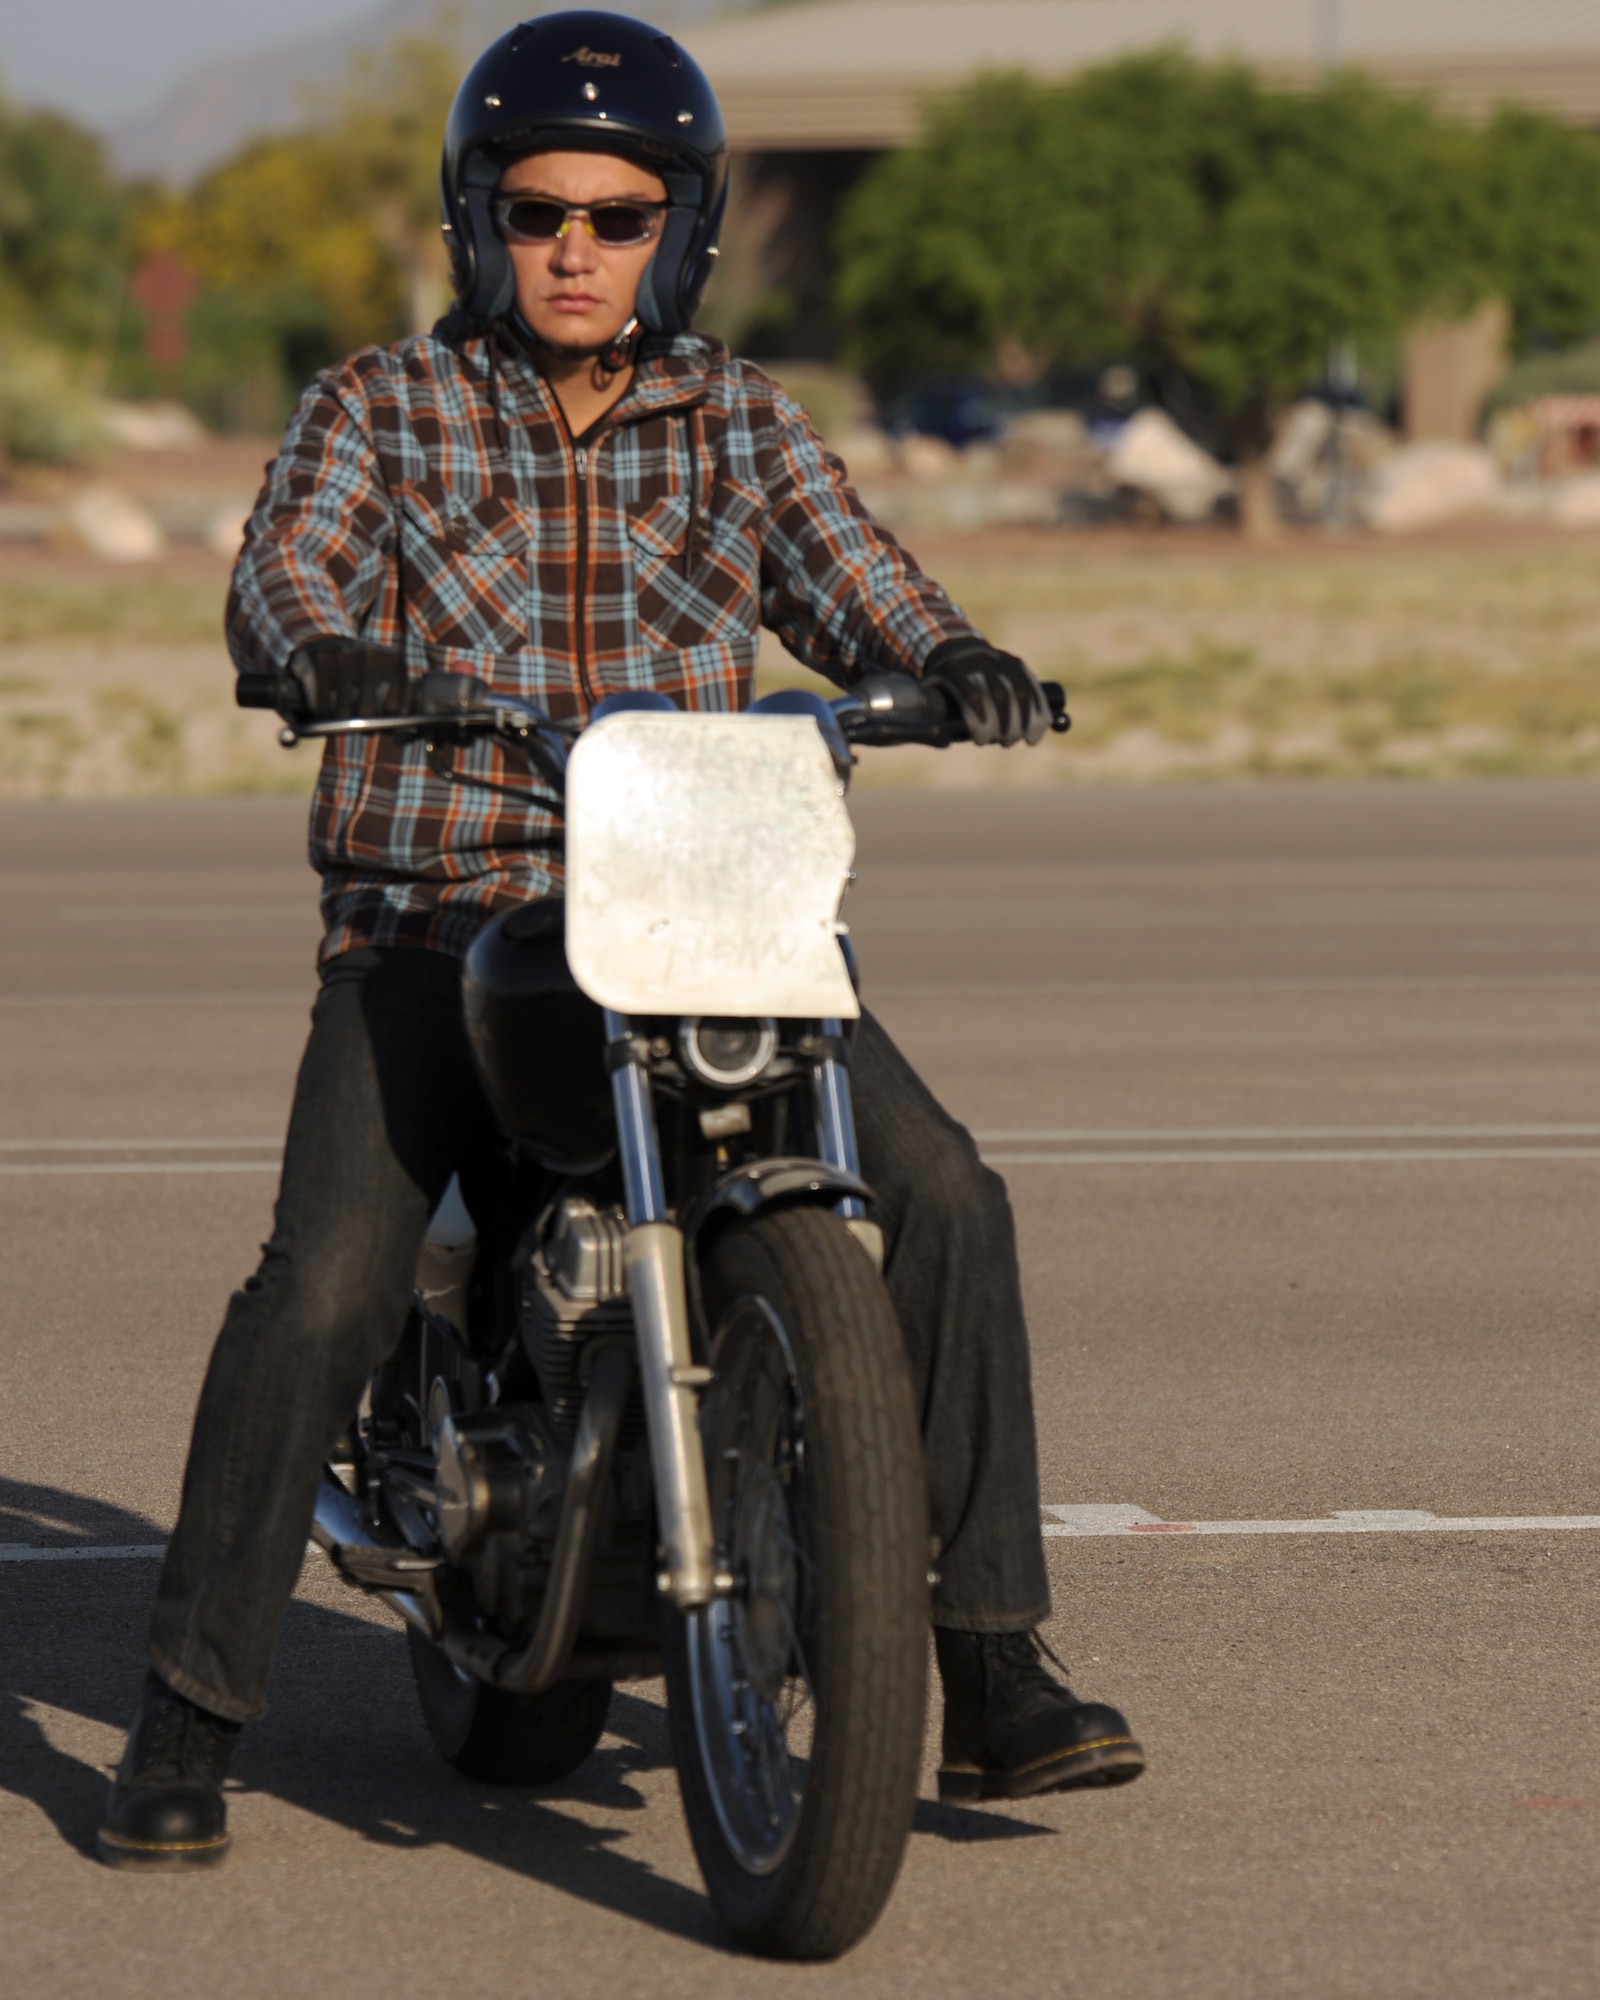 Herman Castillo, 309th Aircraft Maintenance and Regeneration Group, waits to practice techniques he has learned in the Motorcycle Safety Basic Rider Course on Davis-Monthan Air Force Base, Ariz., May 8, 2012. Castillo and other riders who wish to ride motorcycles on D-M are required to take the three-day course. (U.S. Air Force photo by Airman 1st Class Timothy D. Moore/Released)